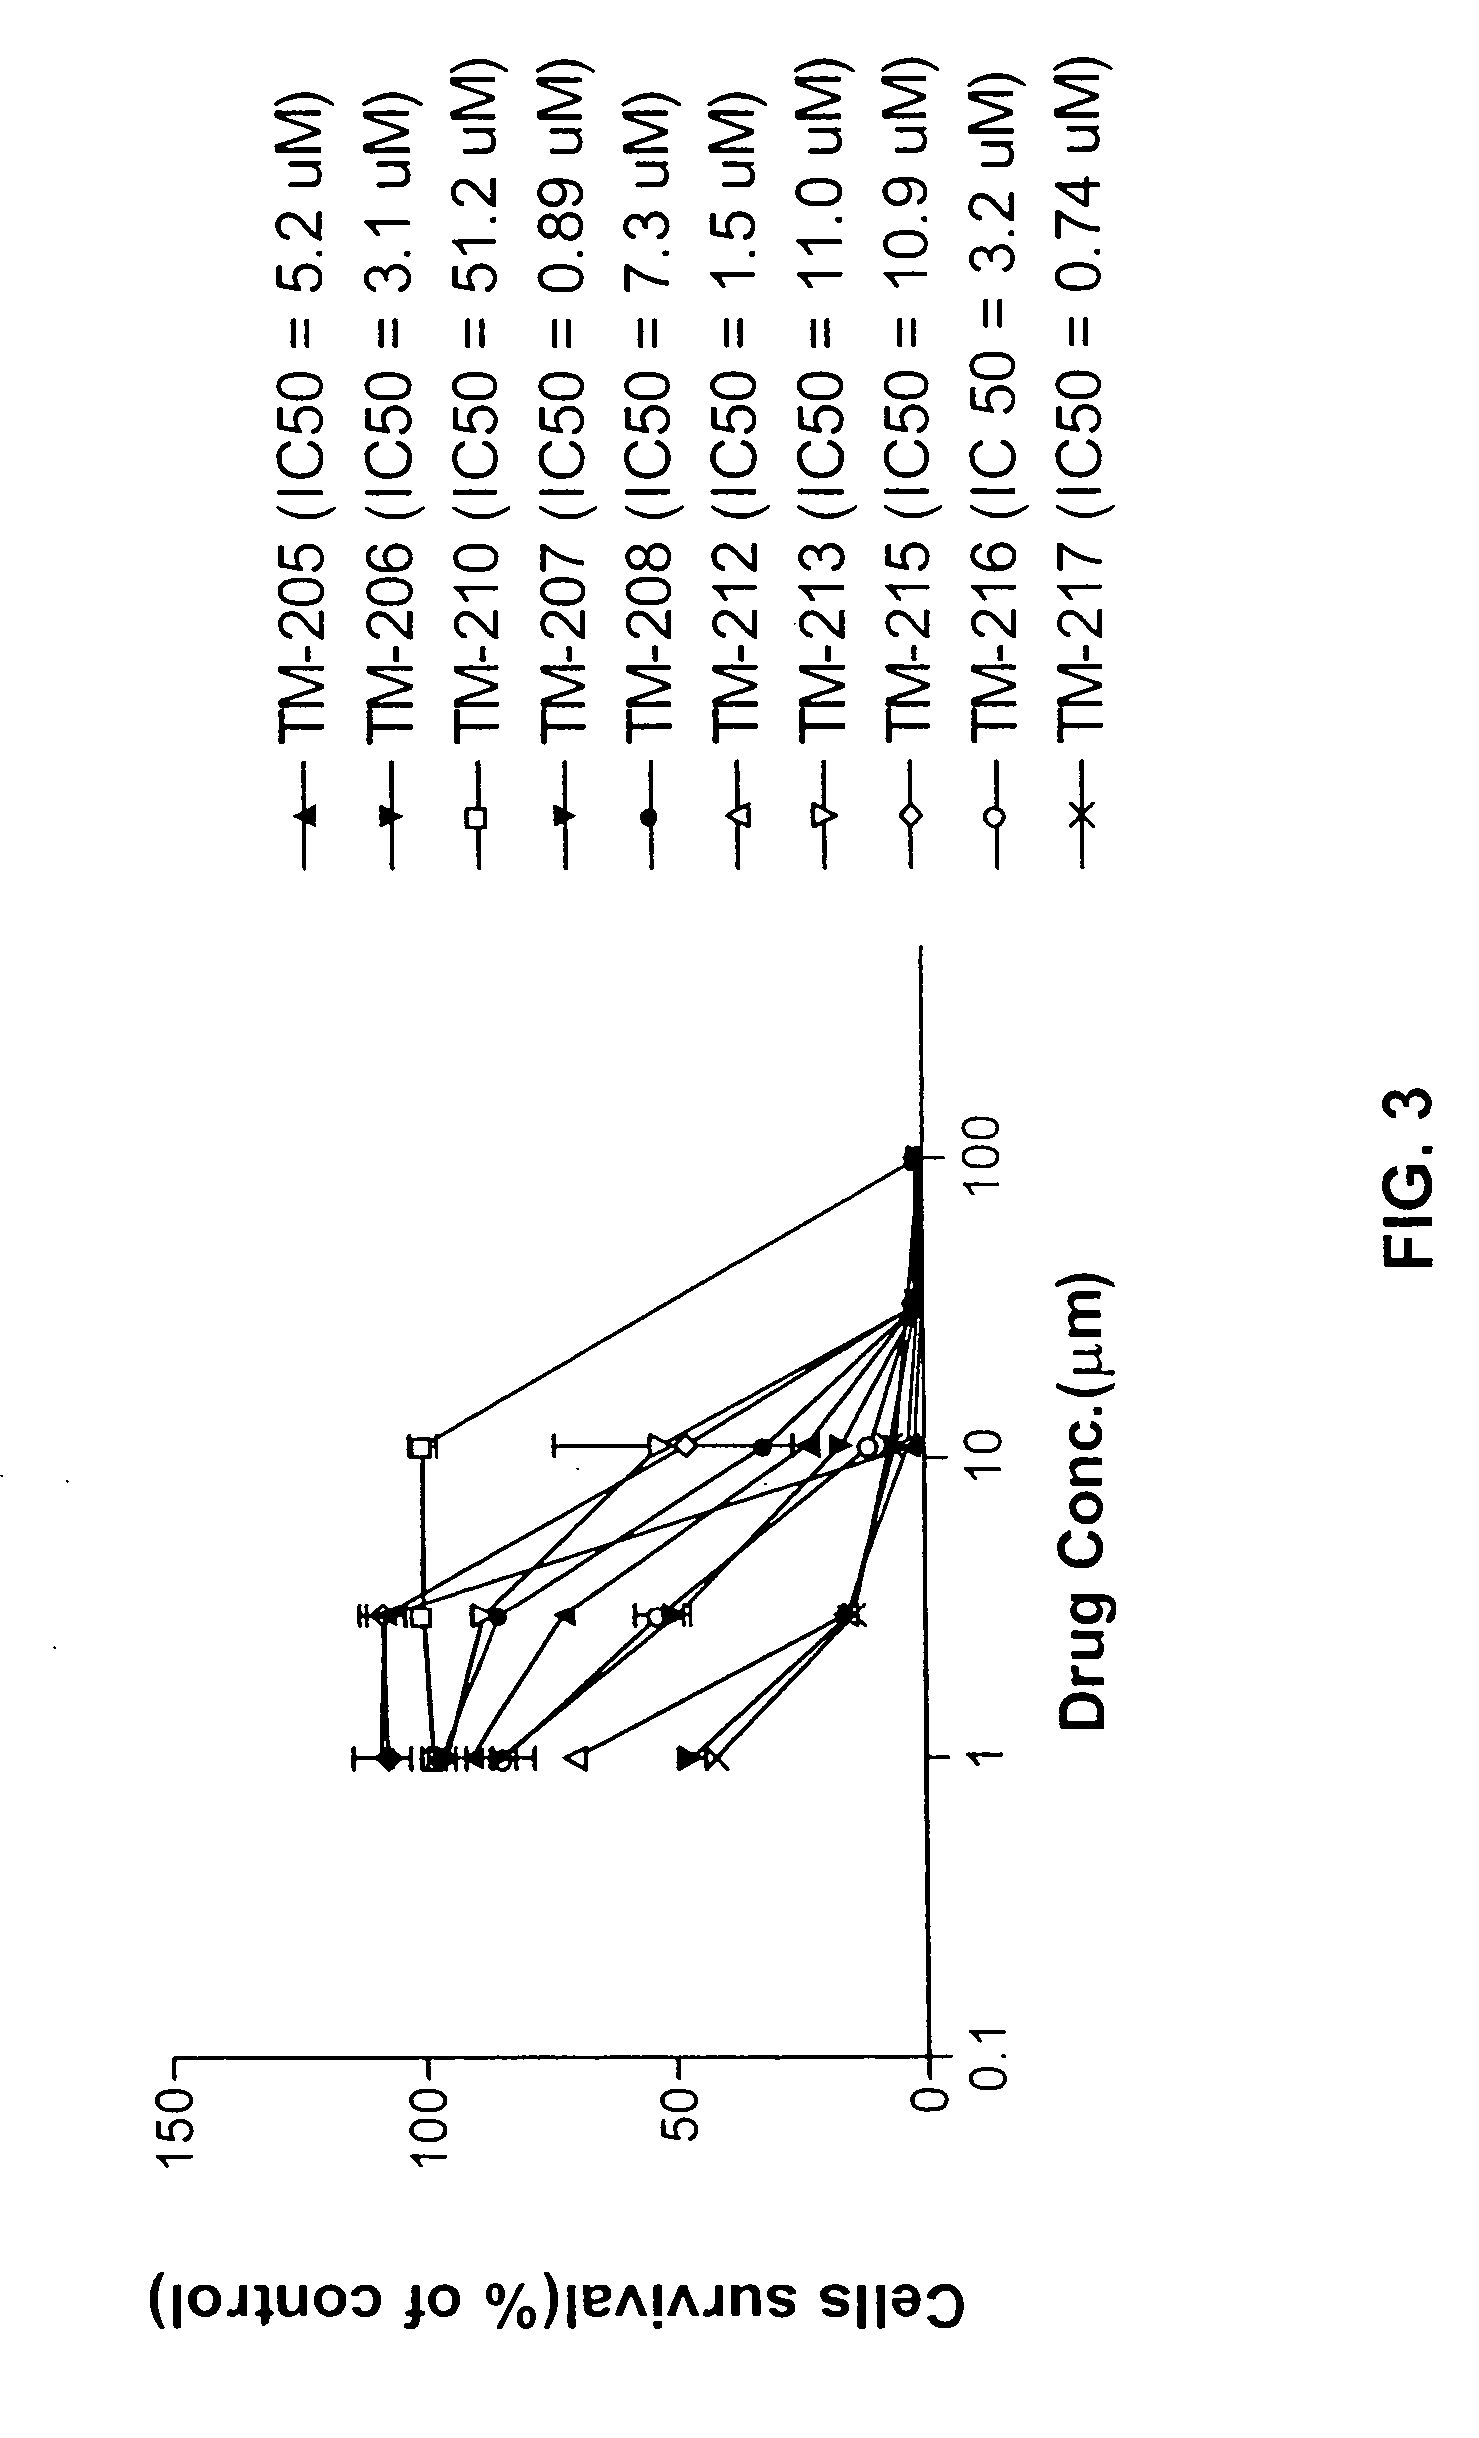 Small molecule inhibitors of anti-apoptotic BCL-2 family members and the uses thereof